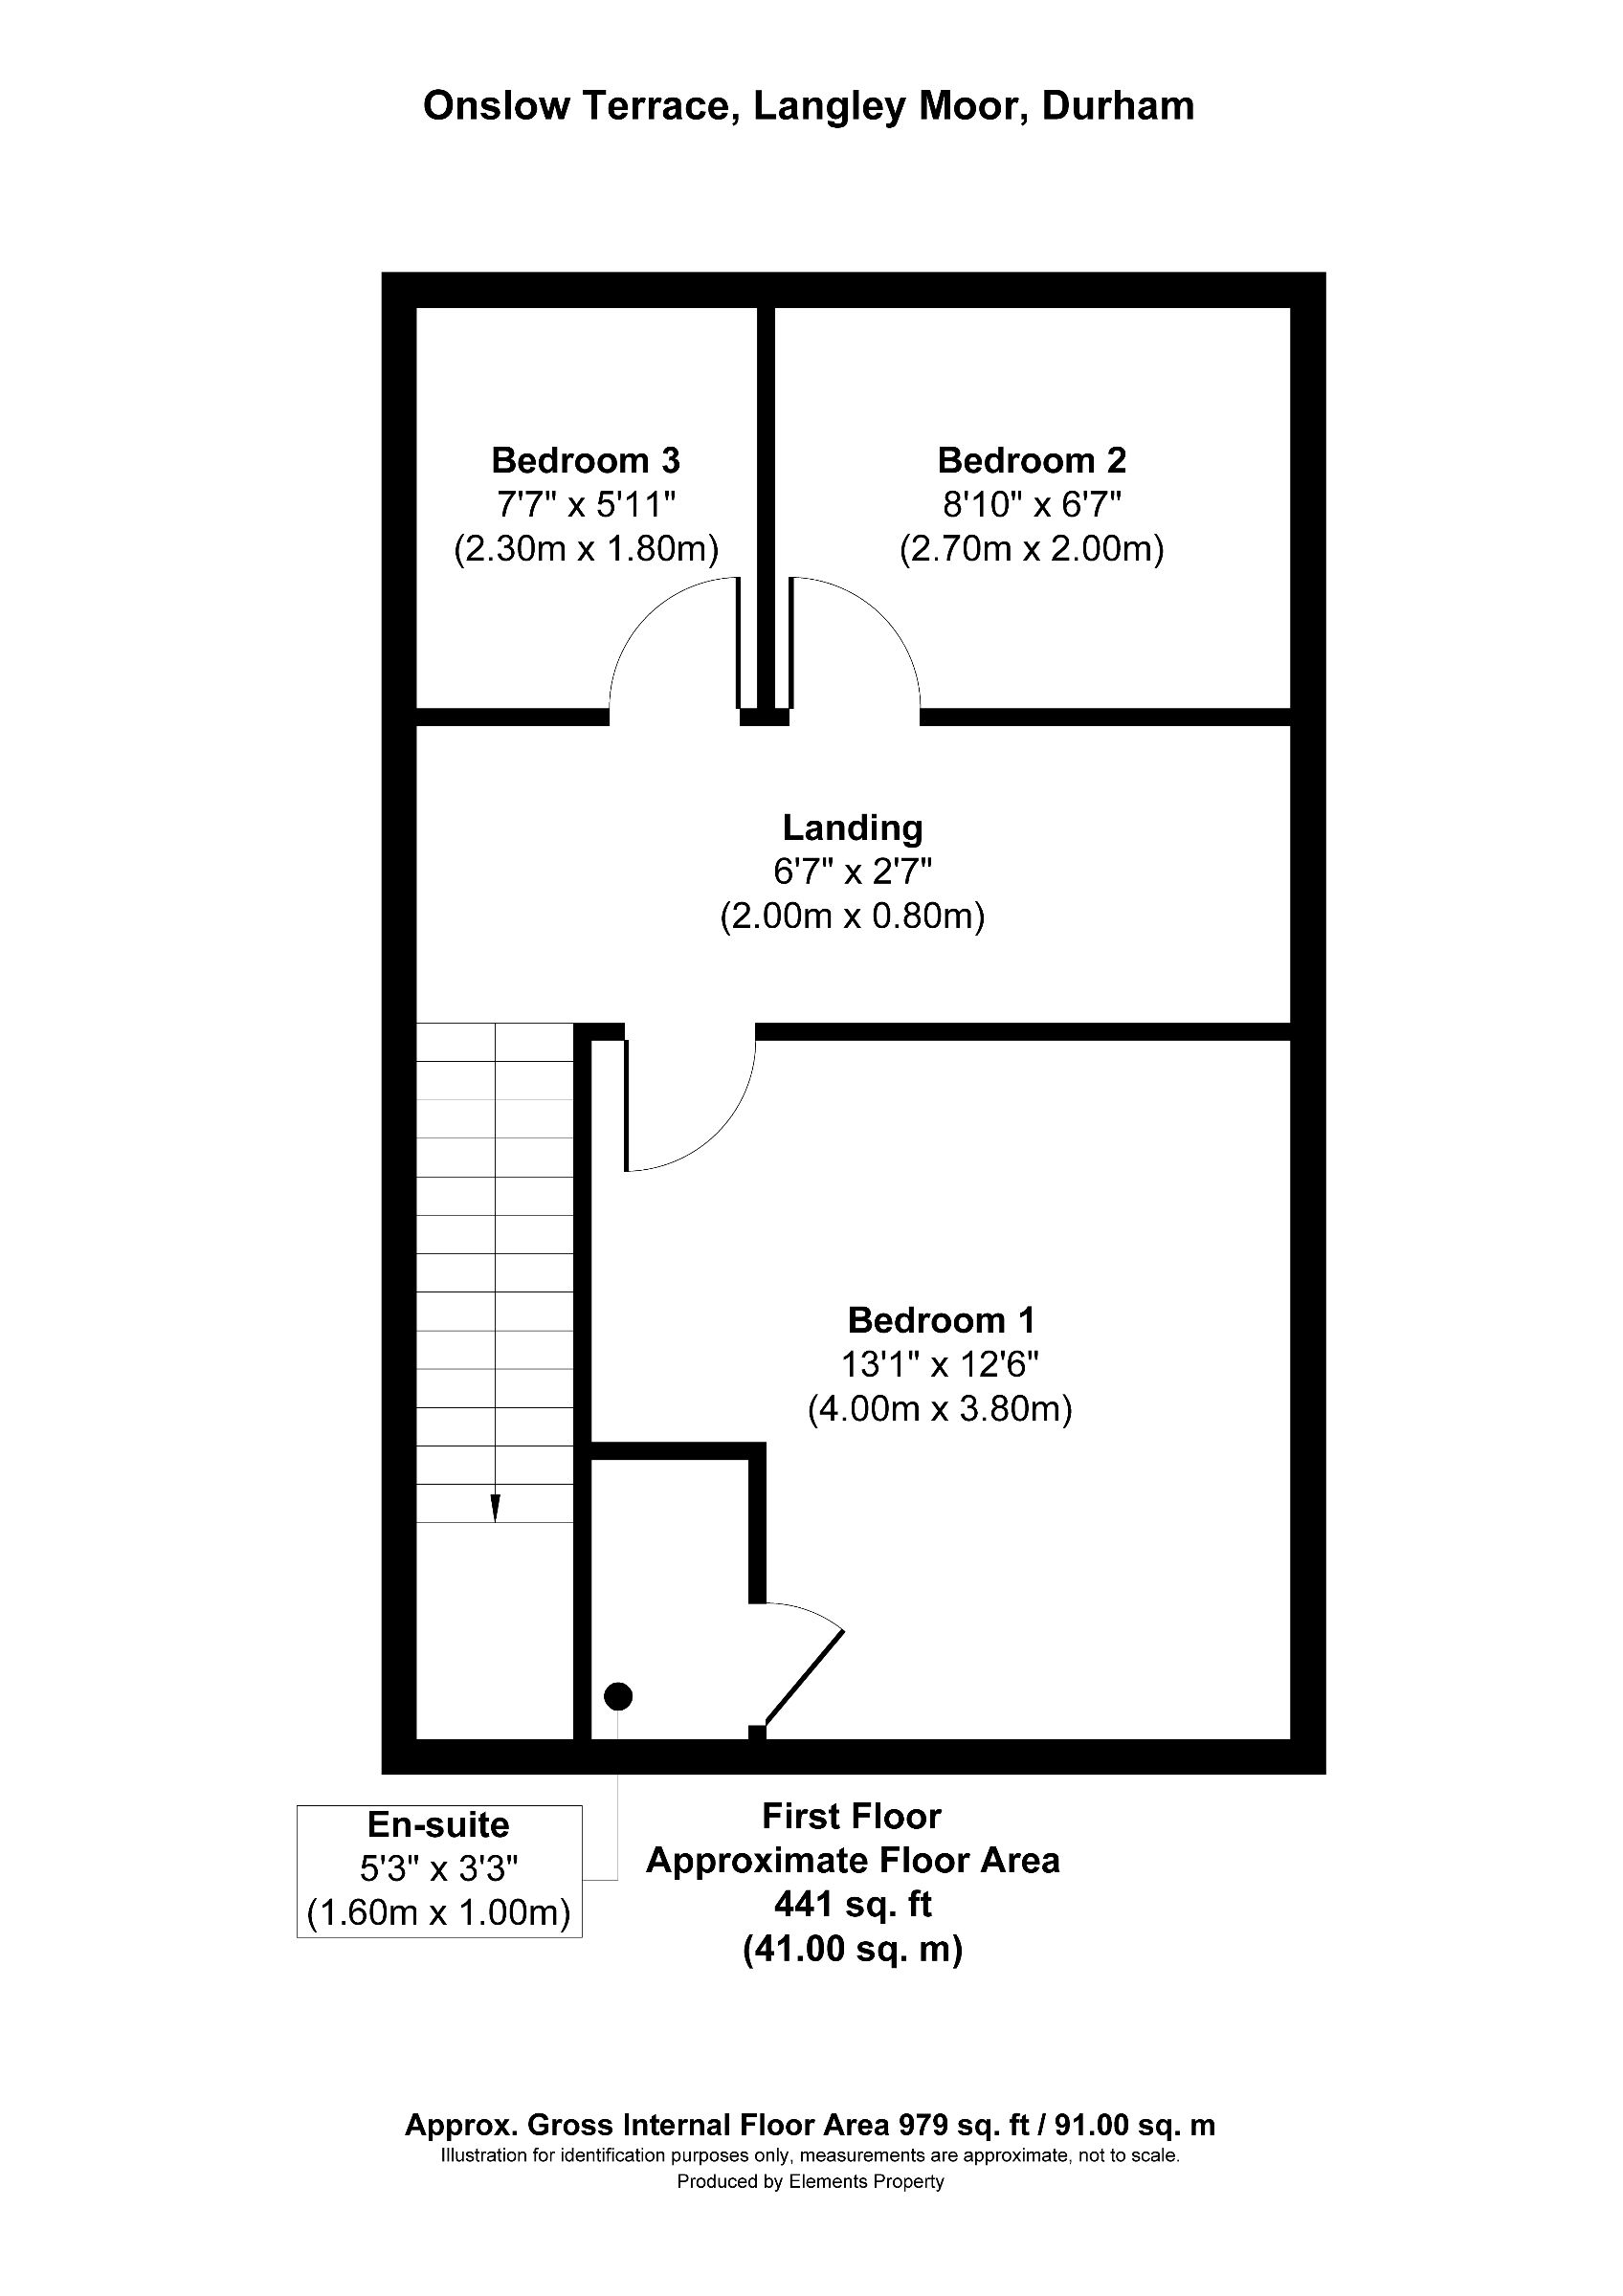 3 bed terraced house for sale in Onslow Terrace, Durham - Property floorplan